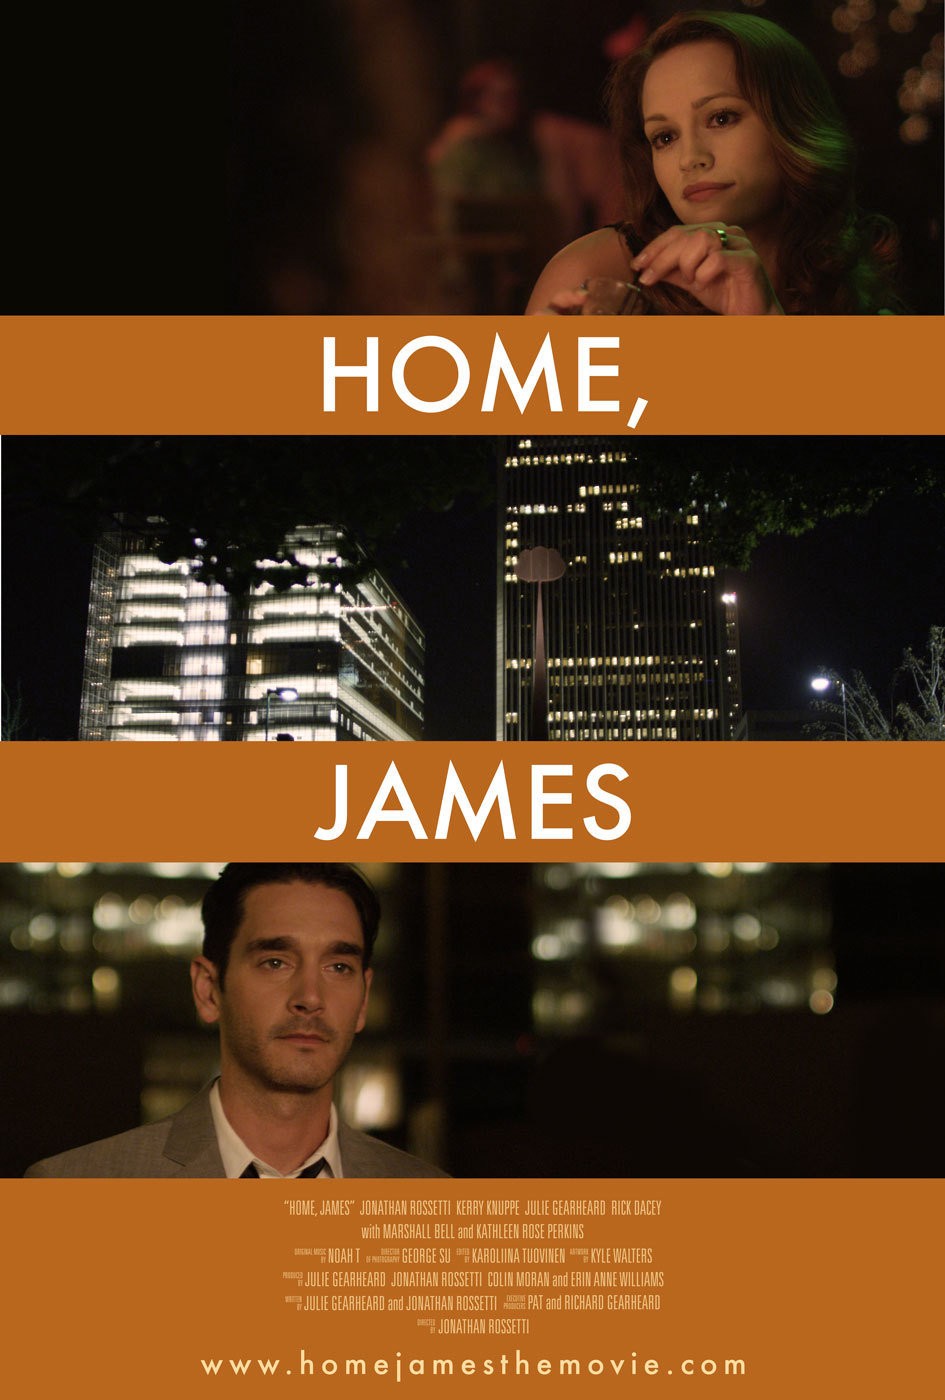 Extra Large Movie Poster Image for Home, James 